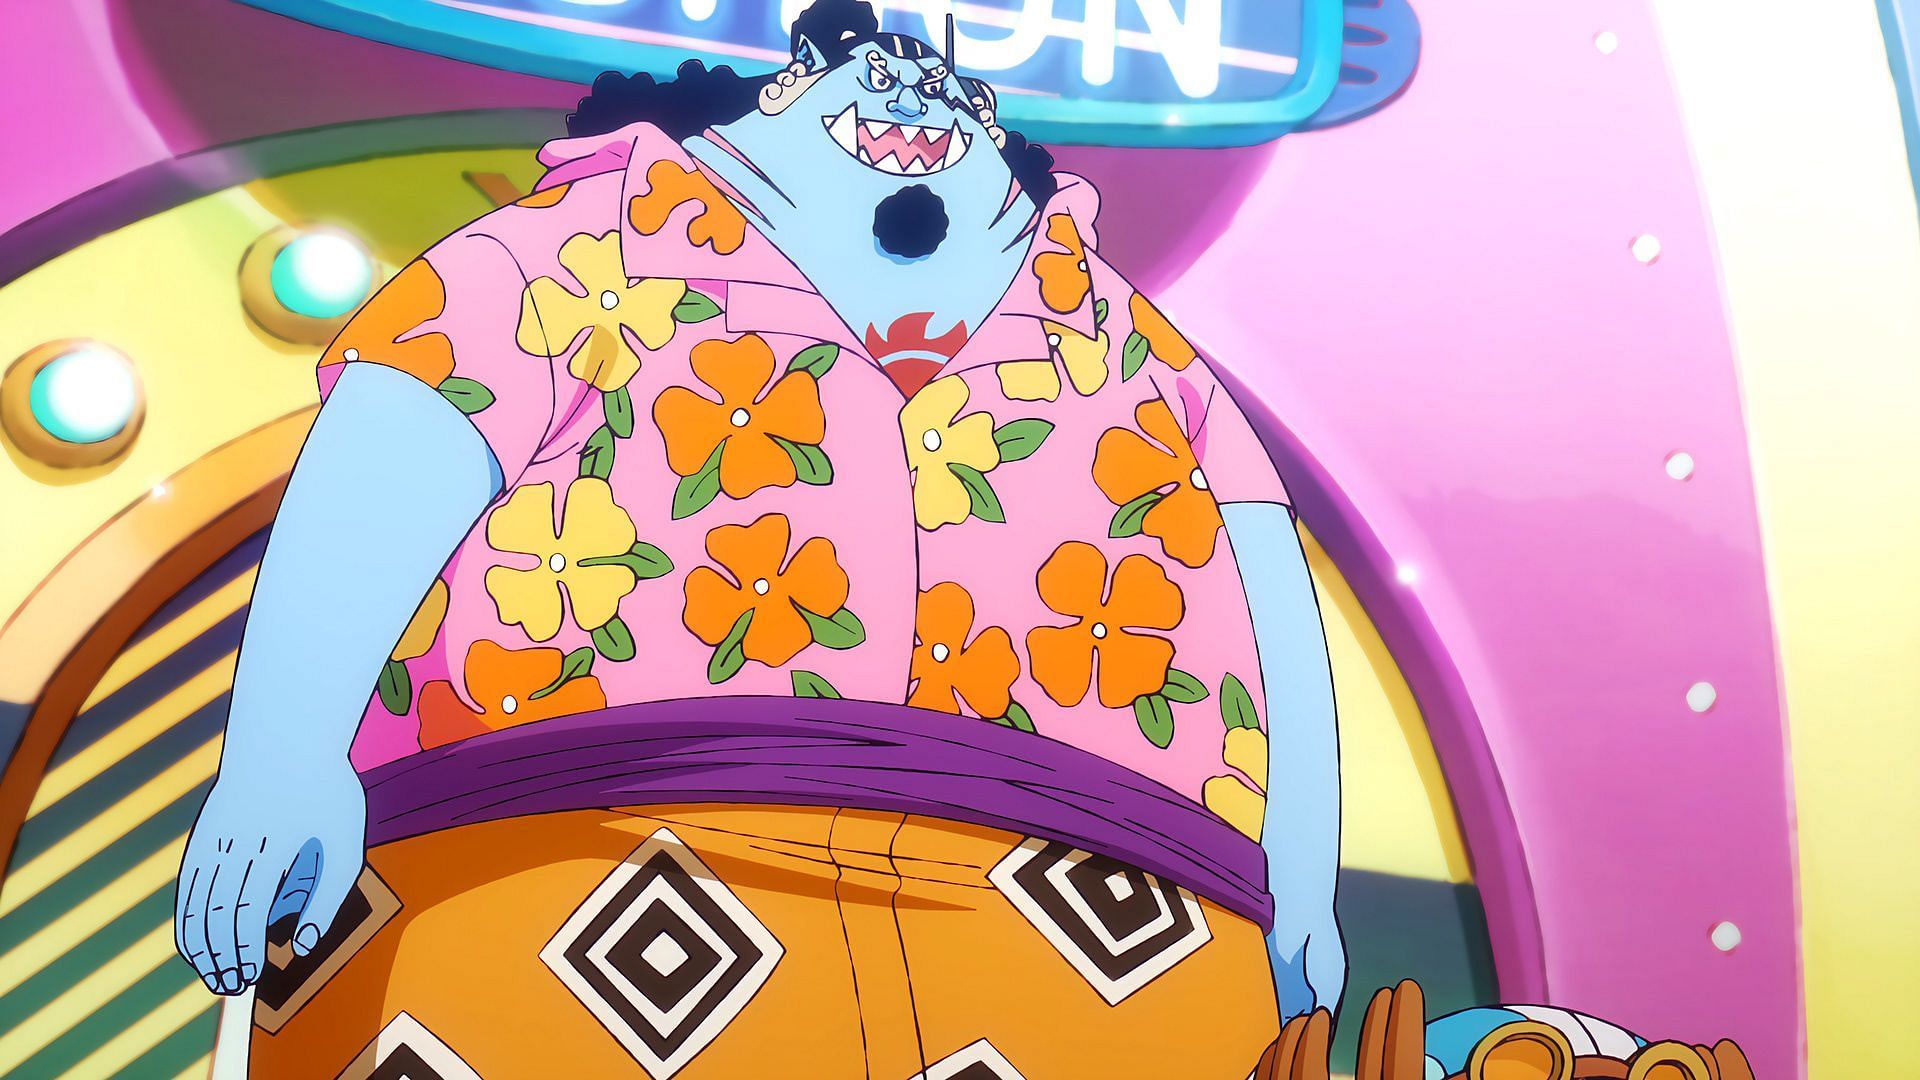 Jinbe as seen in the One Piece anime (Image via Toei Animation)